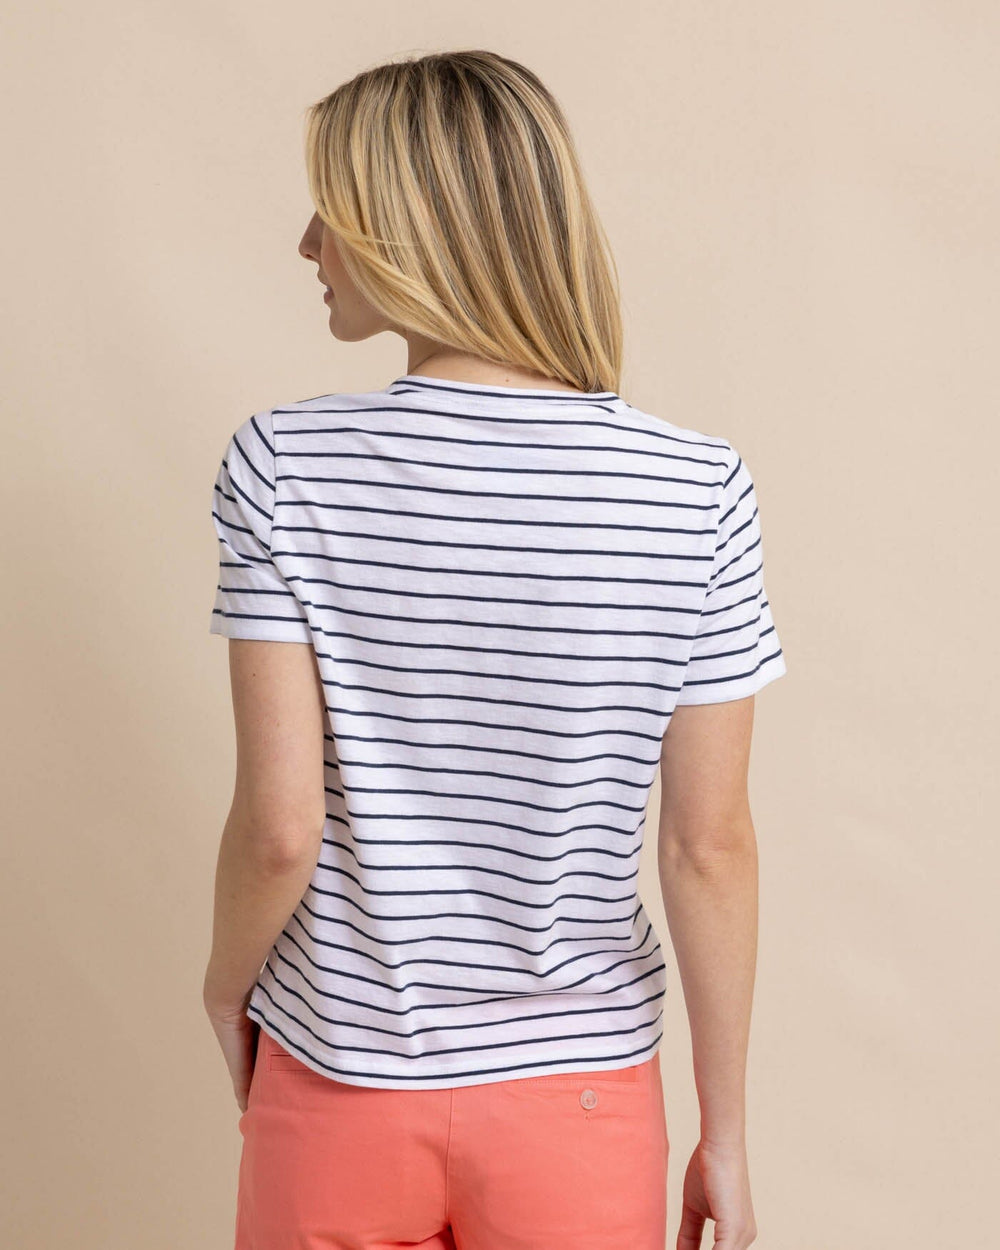 The back view of the Southern Tide Sun Farer Stripe Crew Neck T-Shirt by Southern Tide - Dress Blue